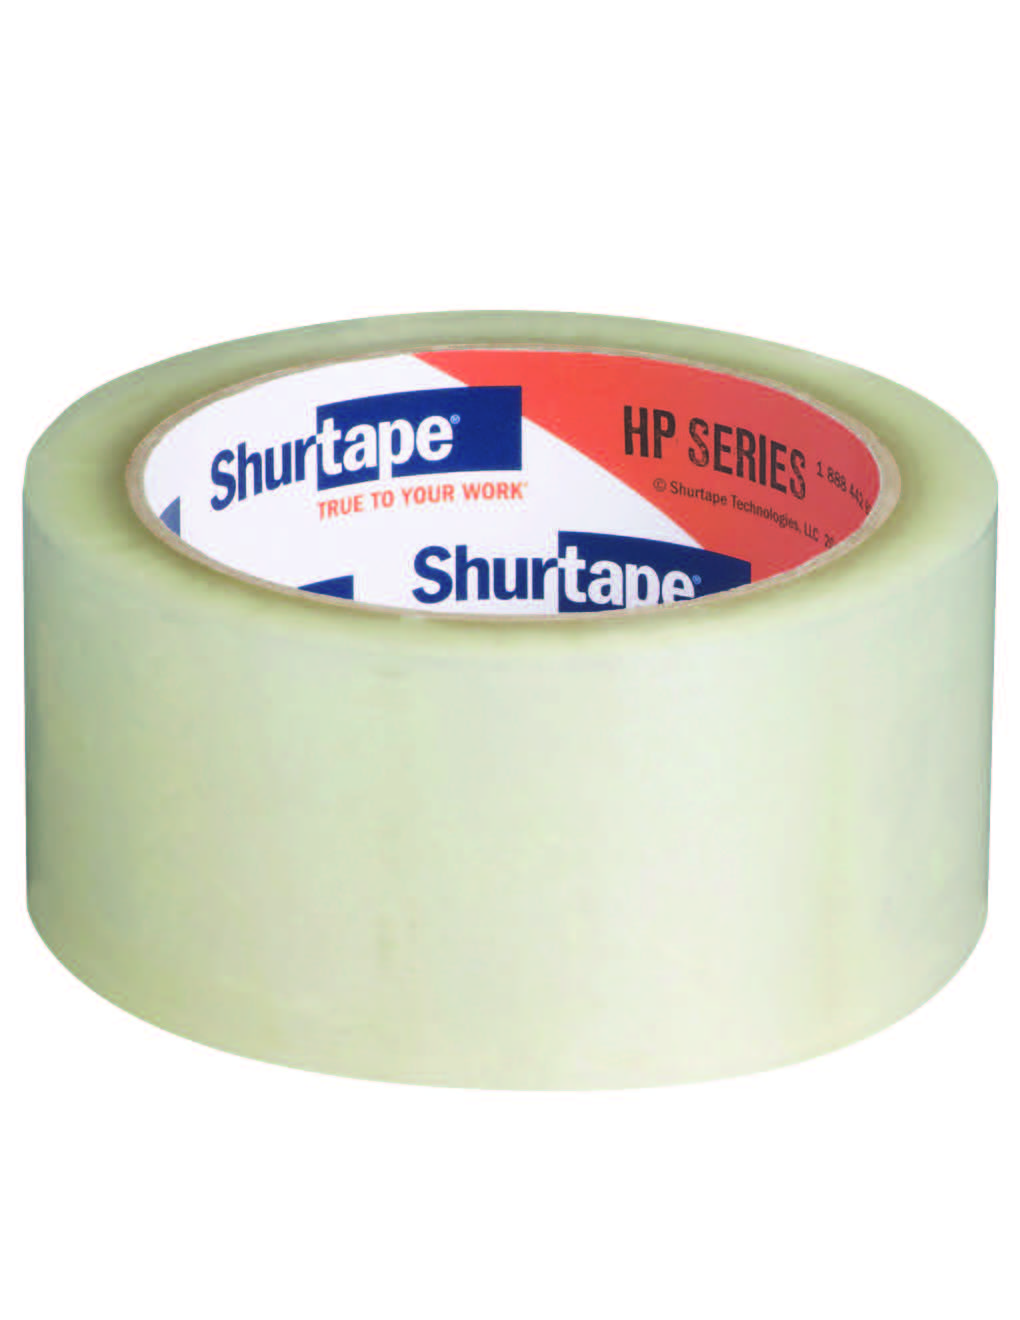 HP-800 2 x 55 48MM x 50M Clear 3.4 Mil Polyester Hot Melt Tape 36 Rolls/Case 60 Cases/Pallet